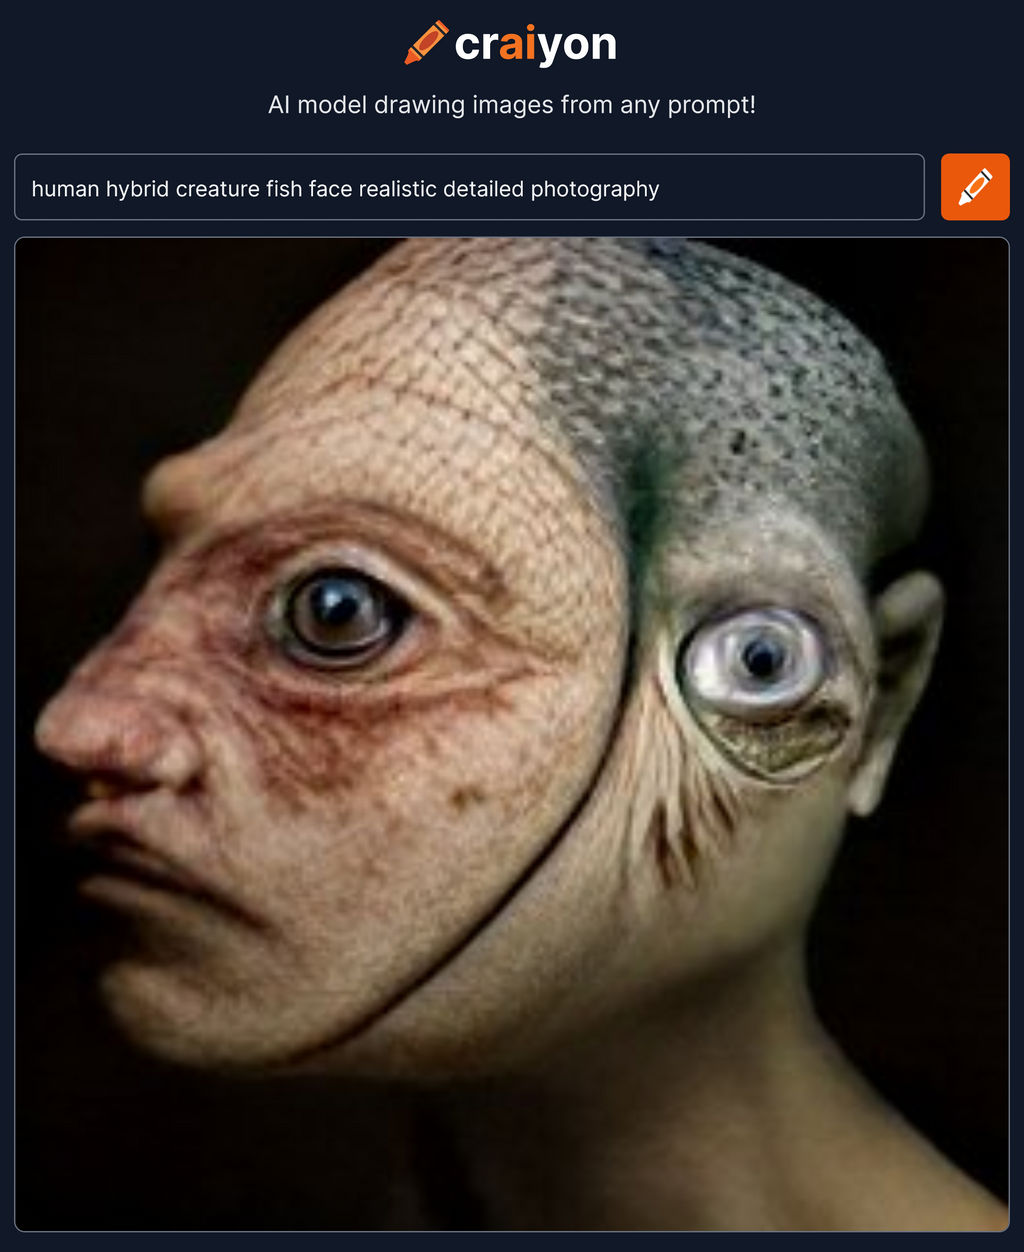 Craiyon 002341 Human Hybrid Creature Fish Face Rea by rubbe on DeviantArt